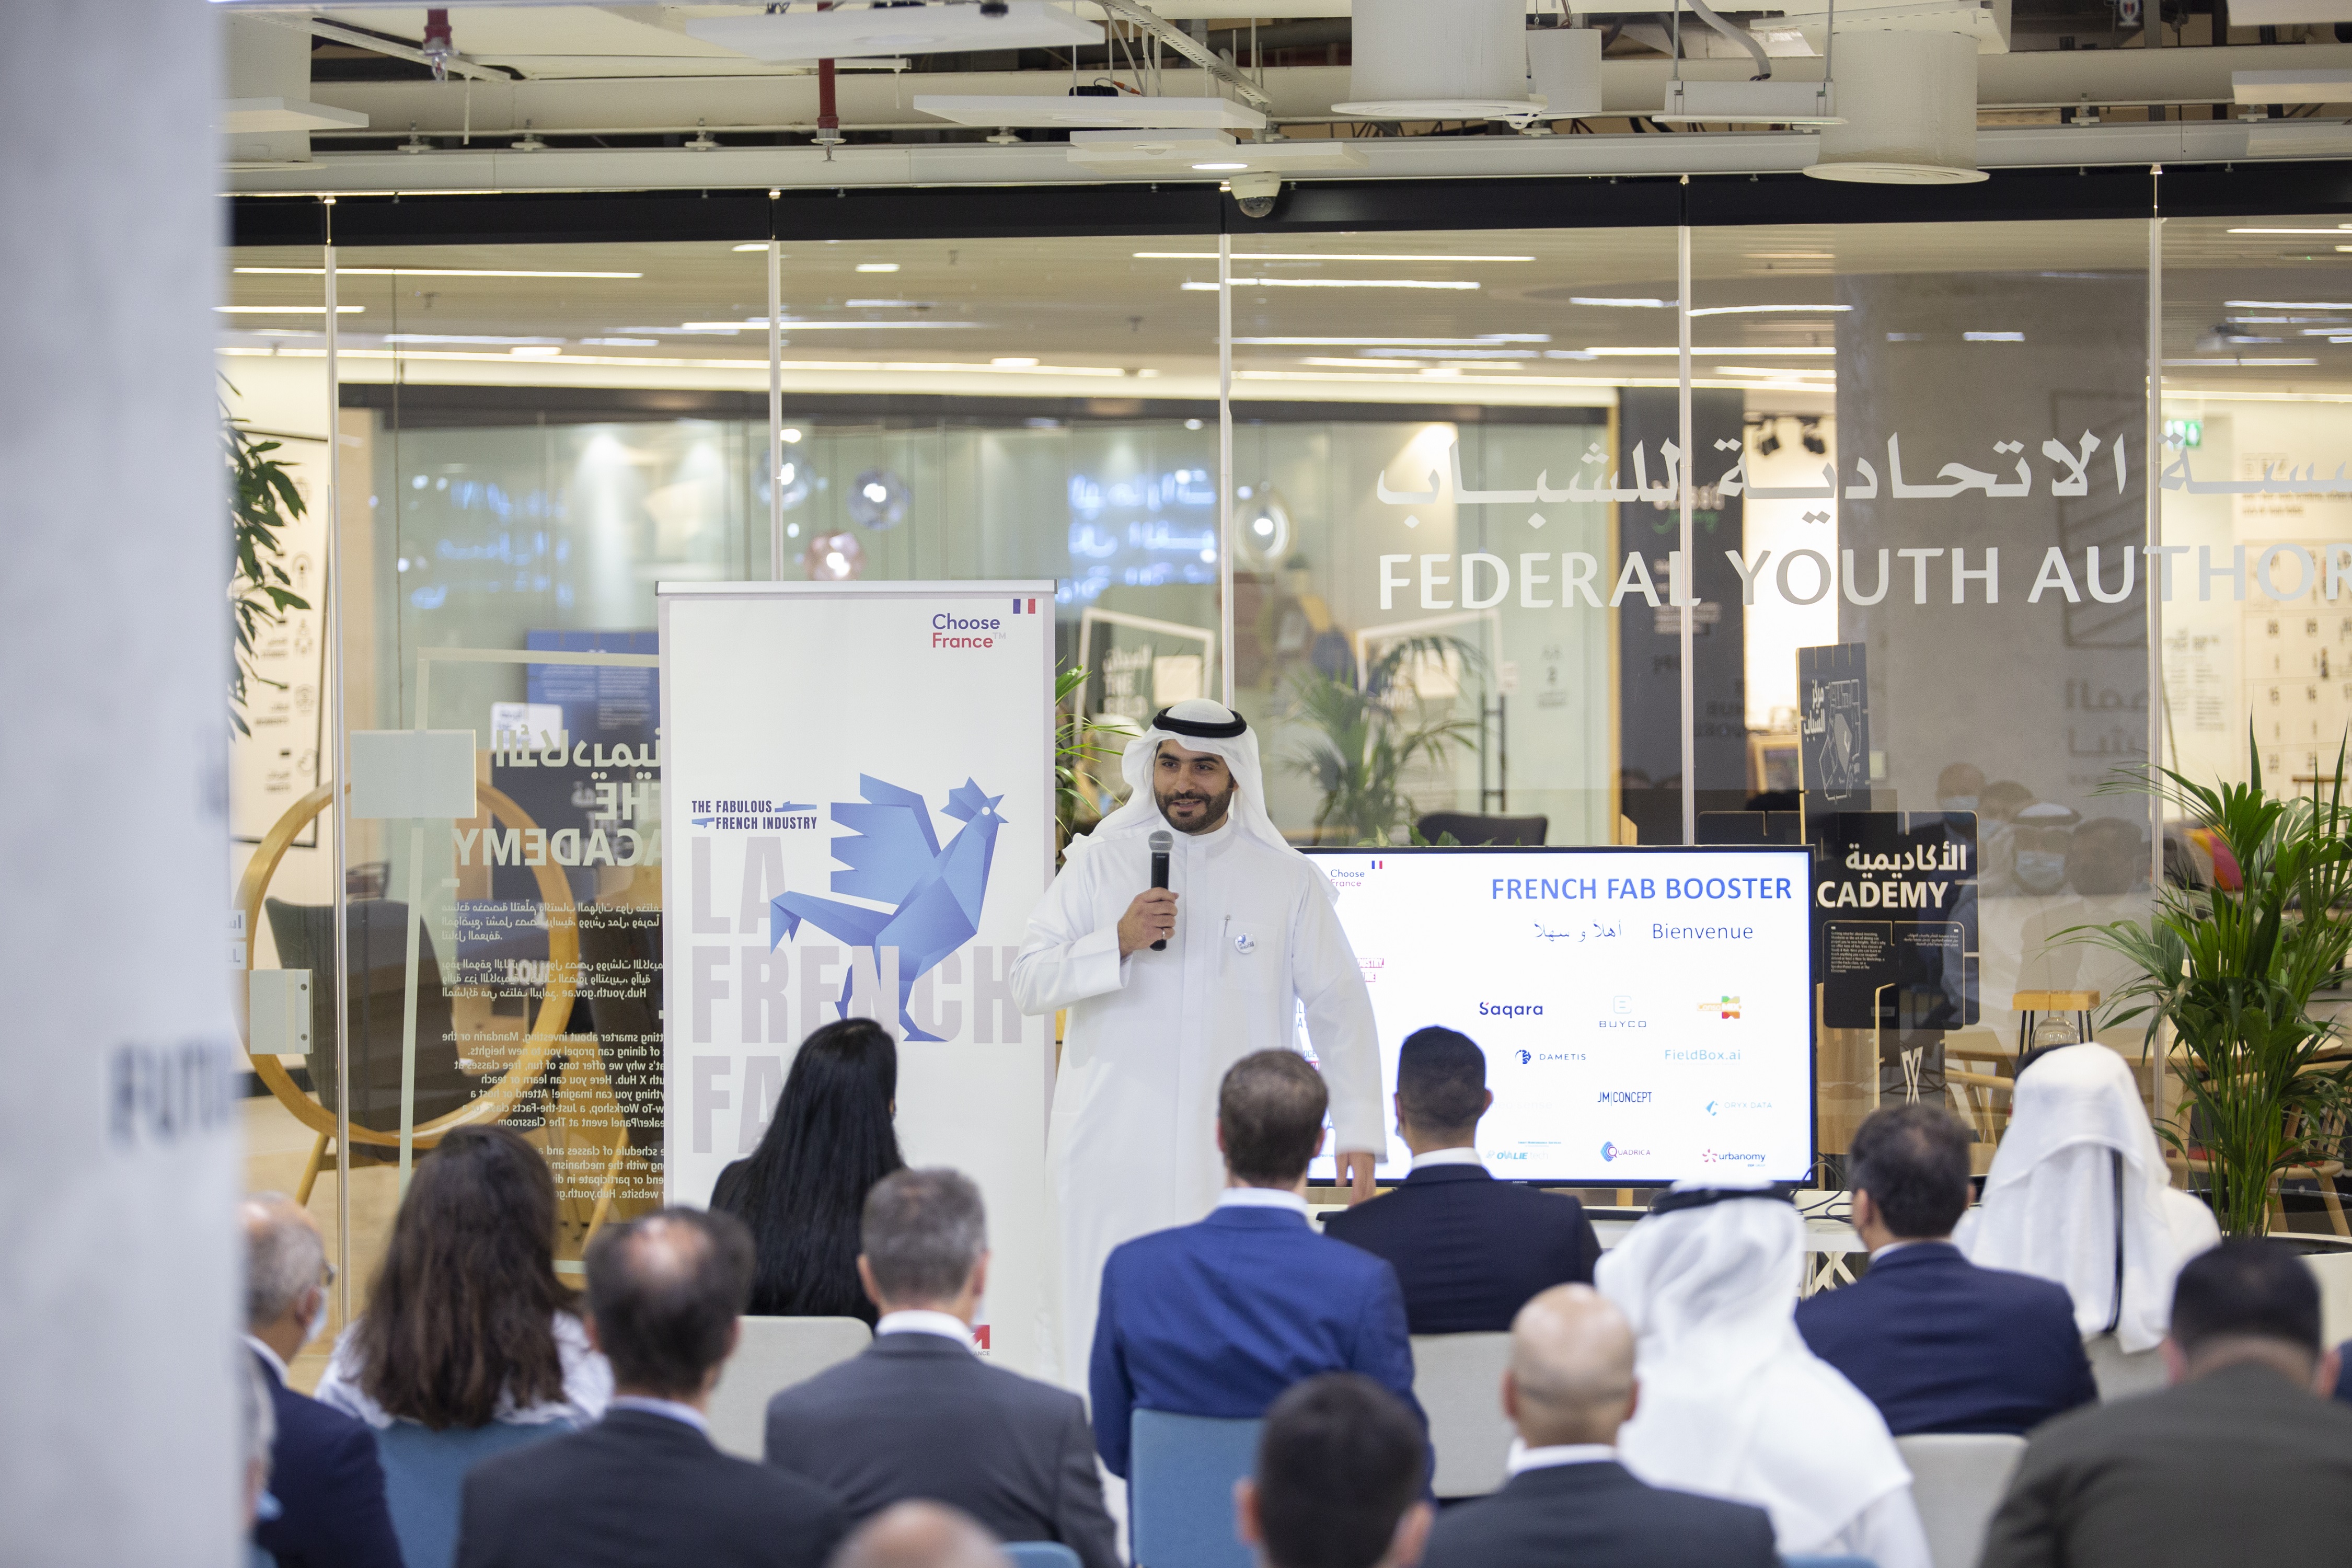 The Ministry of Industry and Advanced Technology briefs 11 French startups on the UAE business environment and its efforts to support growth in the Advanced Technology